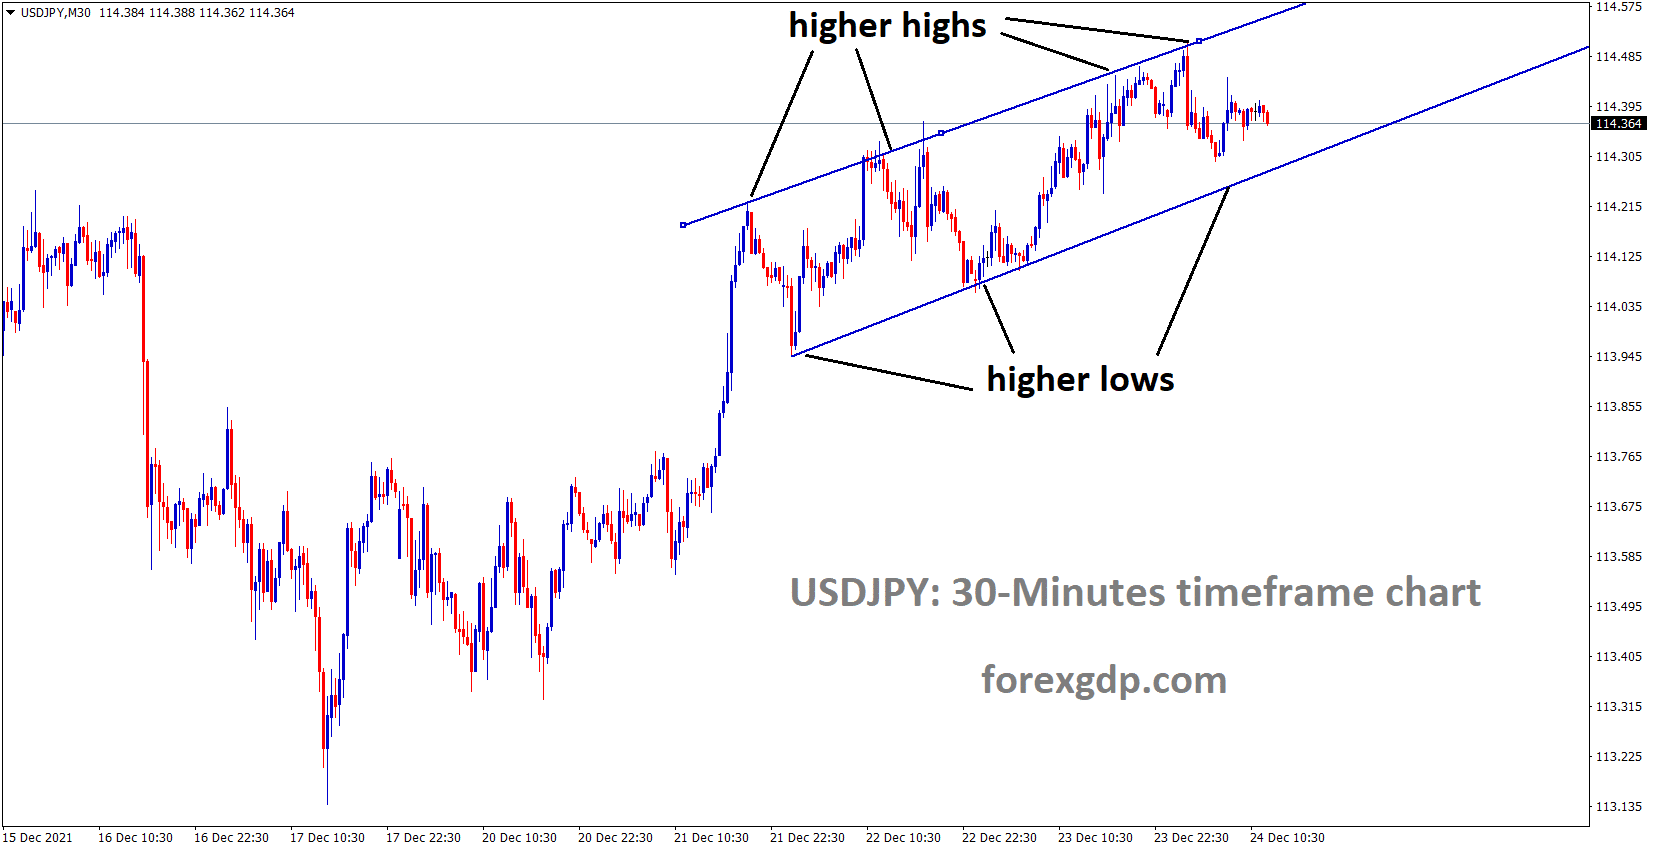 USDJPY is moving in an Ascending channel and the market has reached a near to the higher low area of the channel.